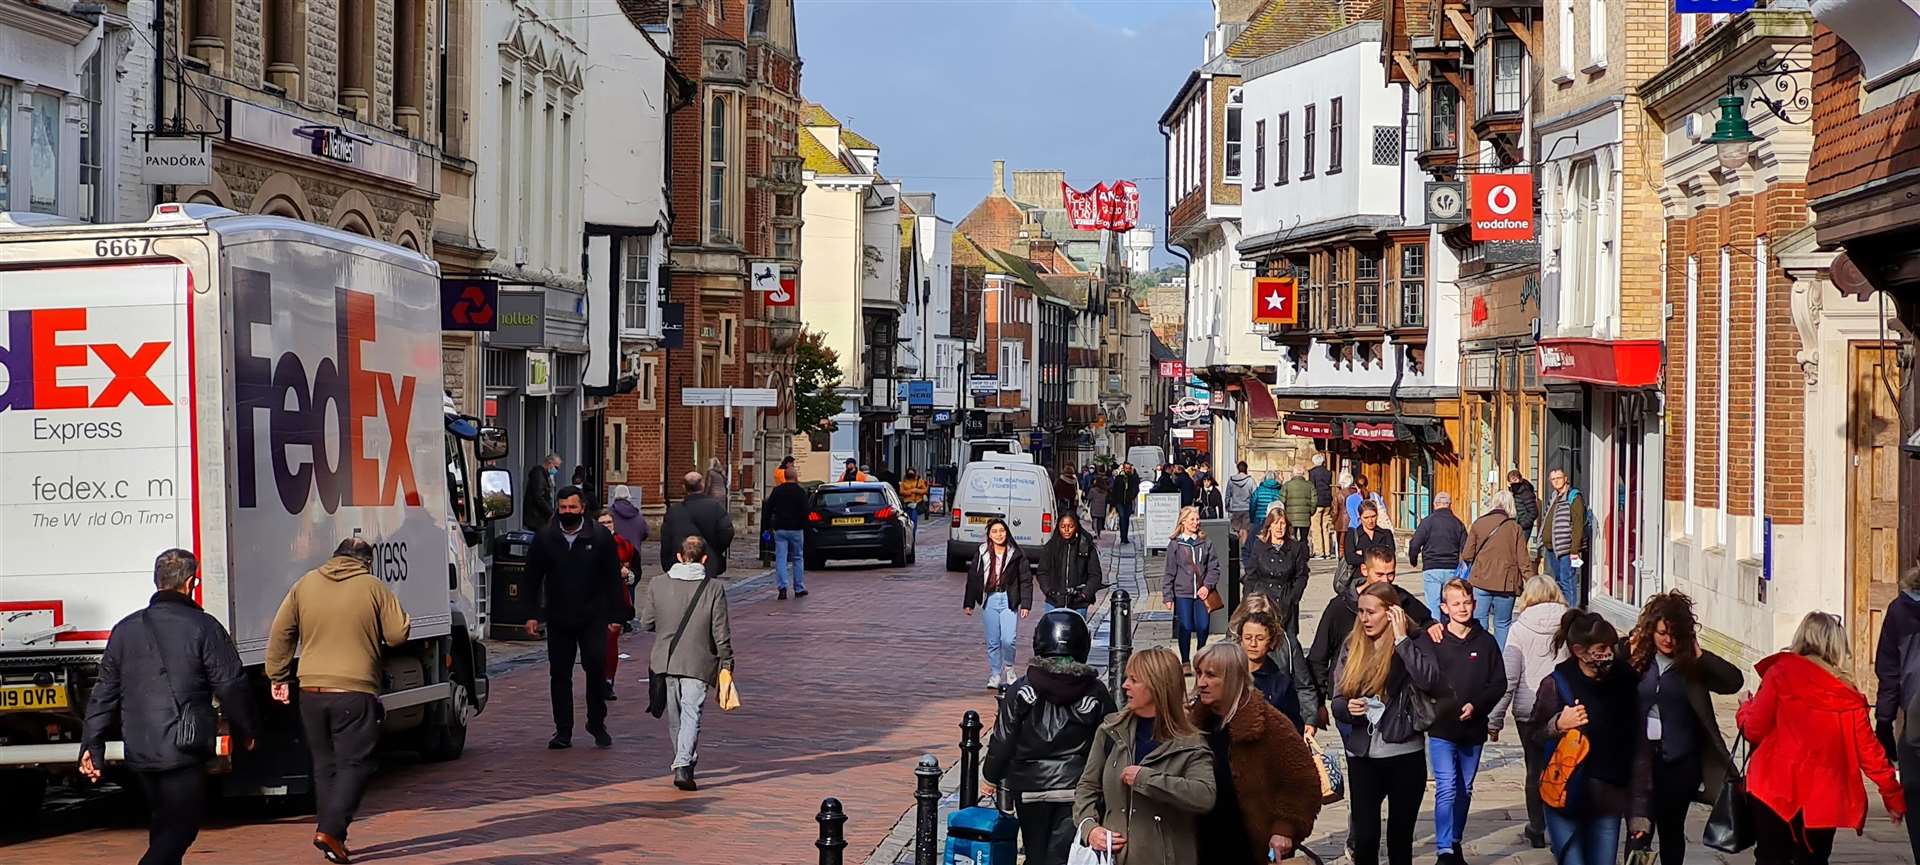 The incident happened in Canterbury High Street